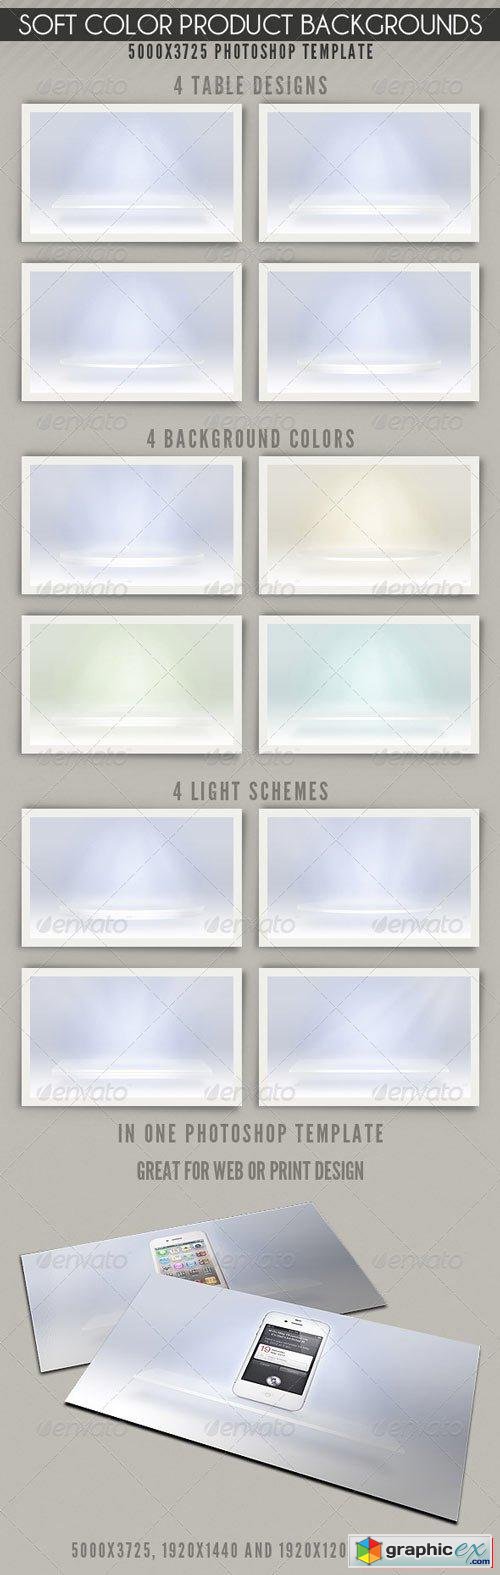 Soft Color Product Backgrounds